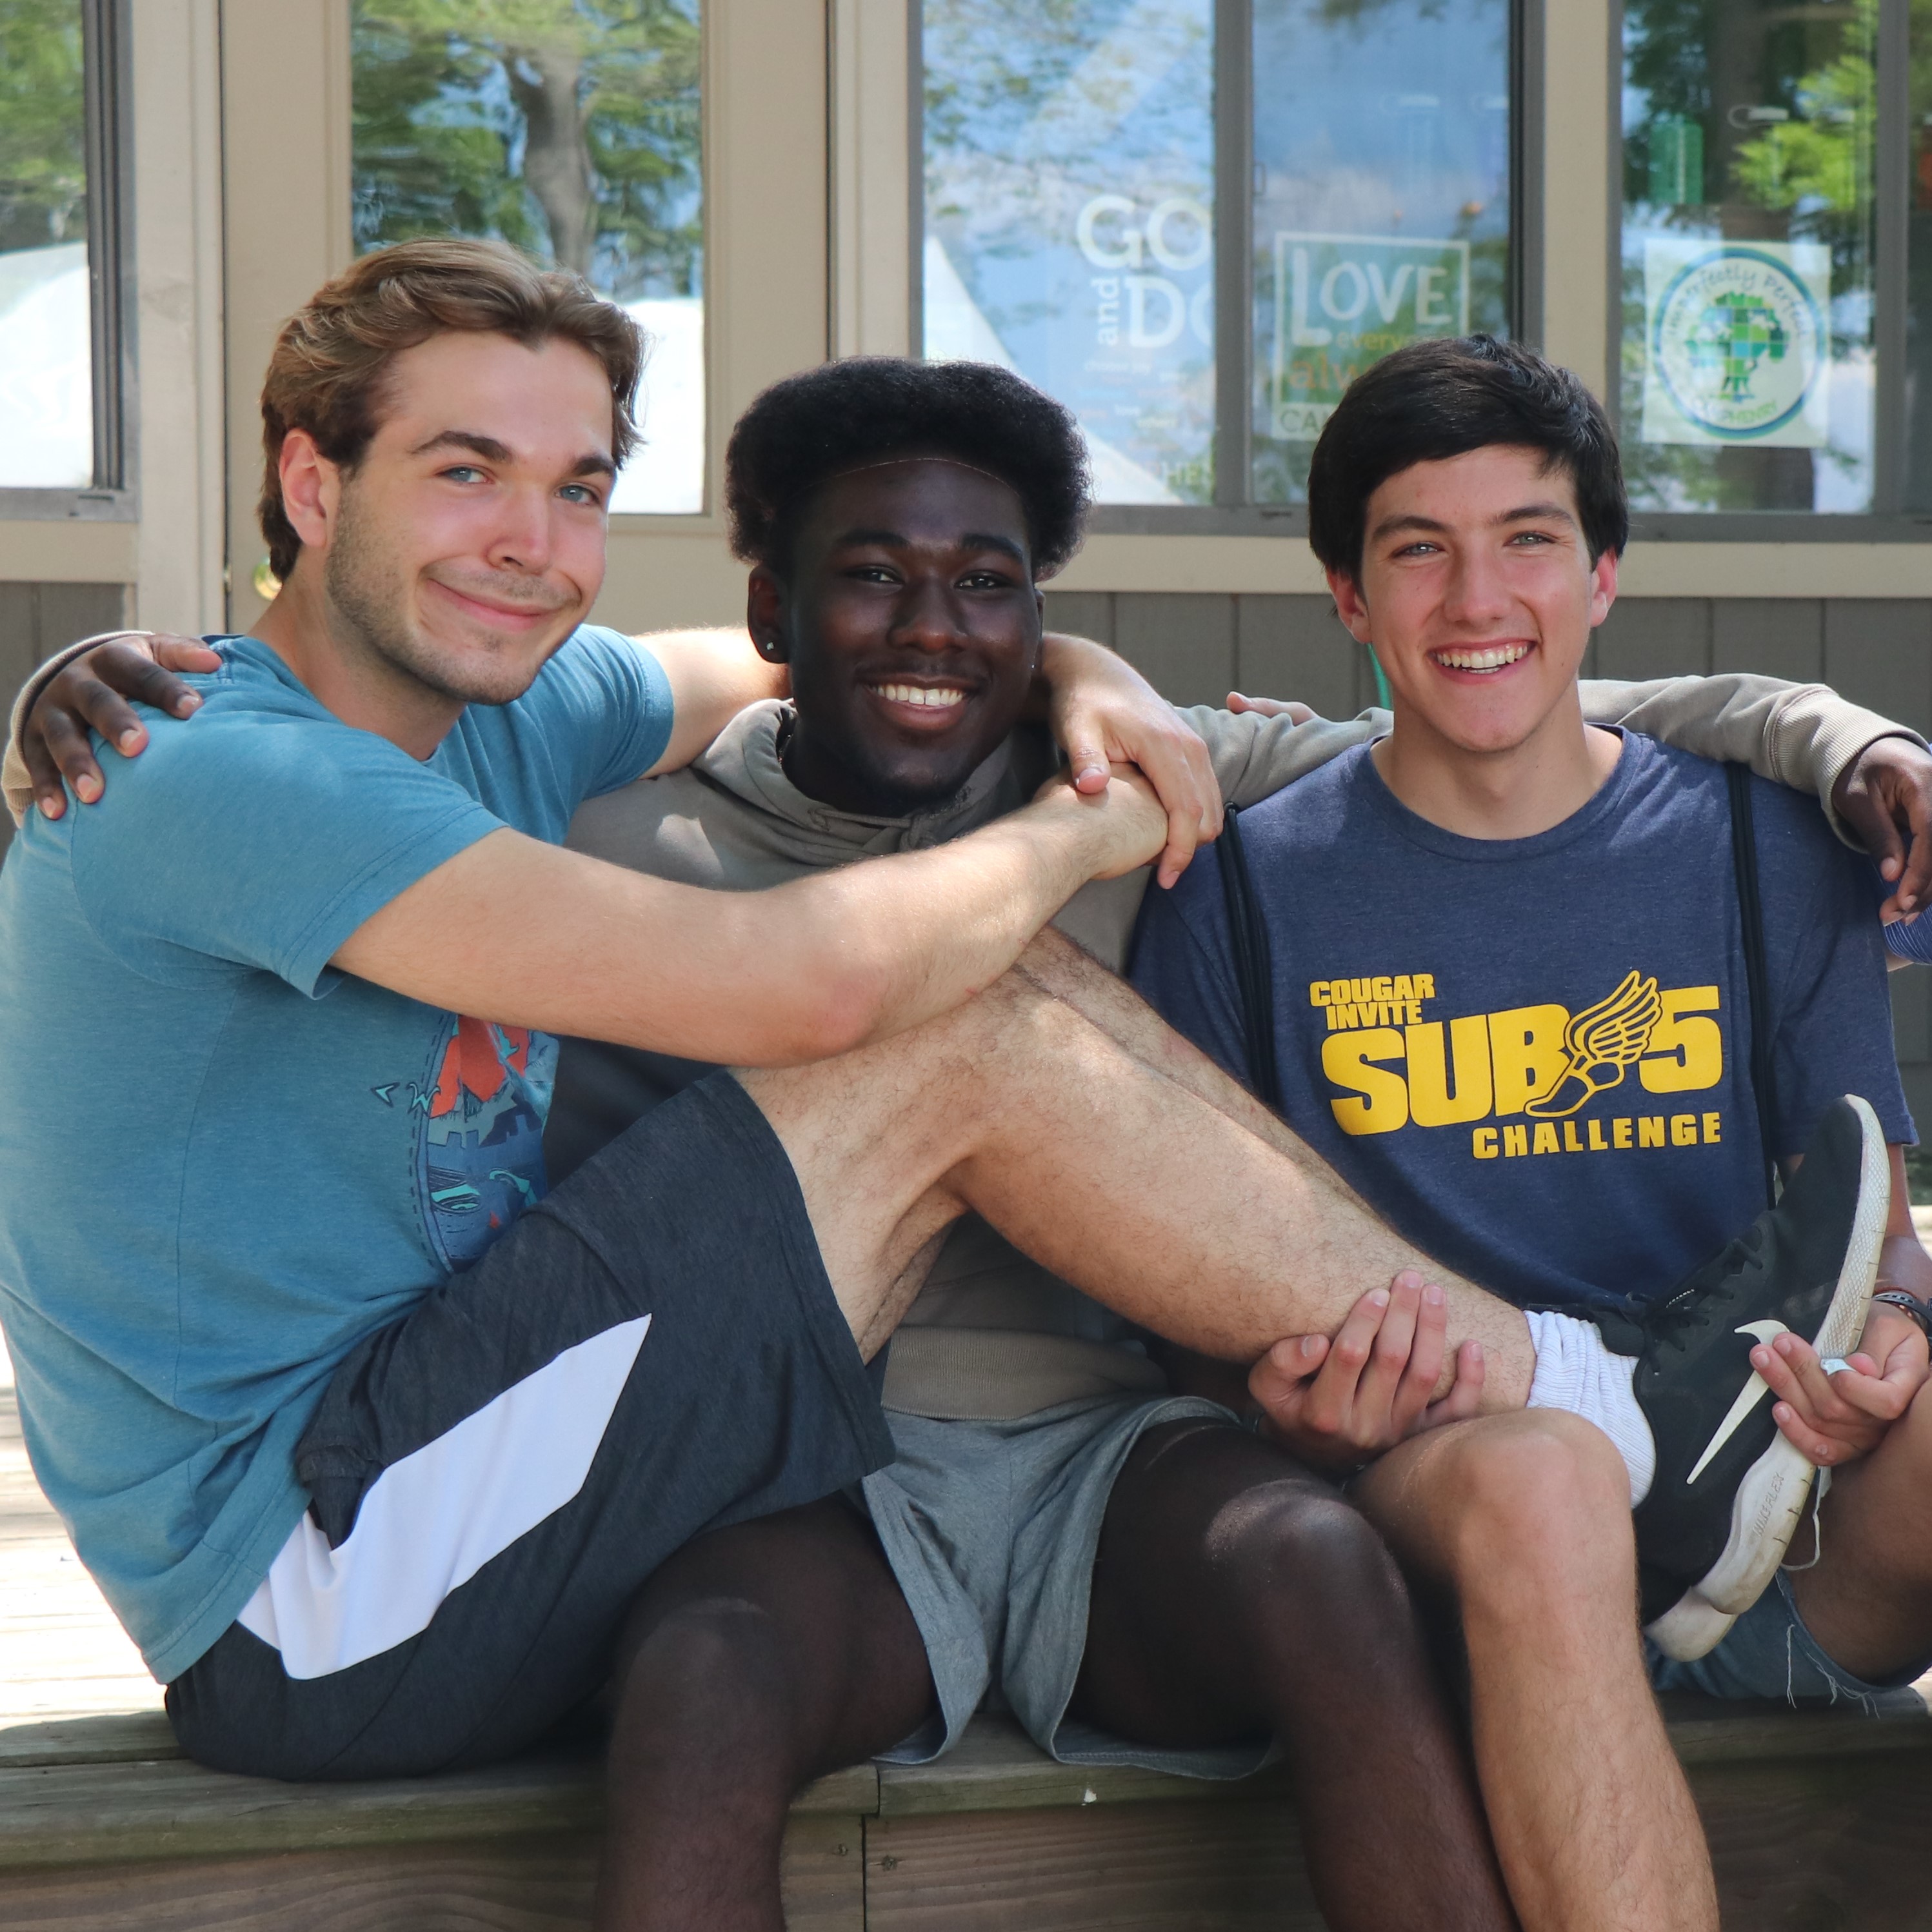 Junior Staff members assist all throughout camp - from helping with programs, working directly with campers, assisting with facilities and maintenance projects, helping out with Day Camp, and assisting with food service